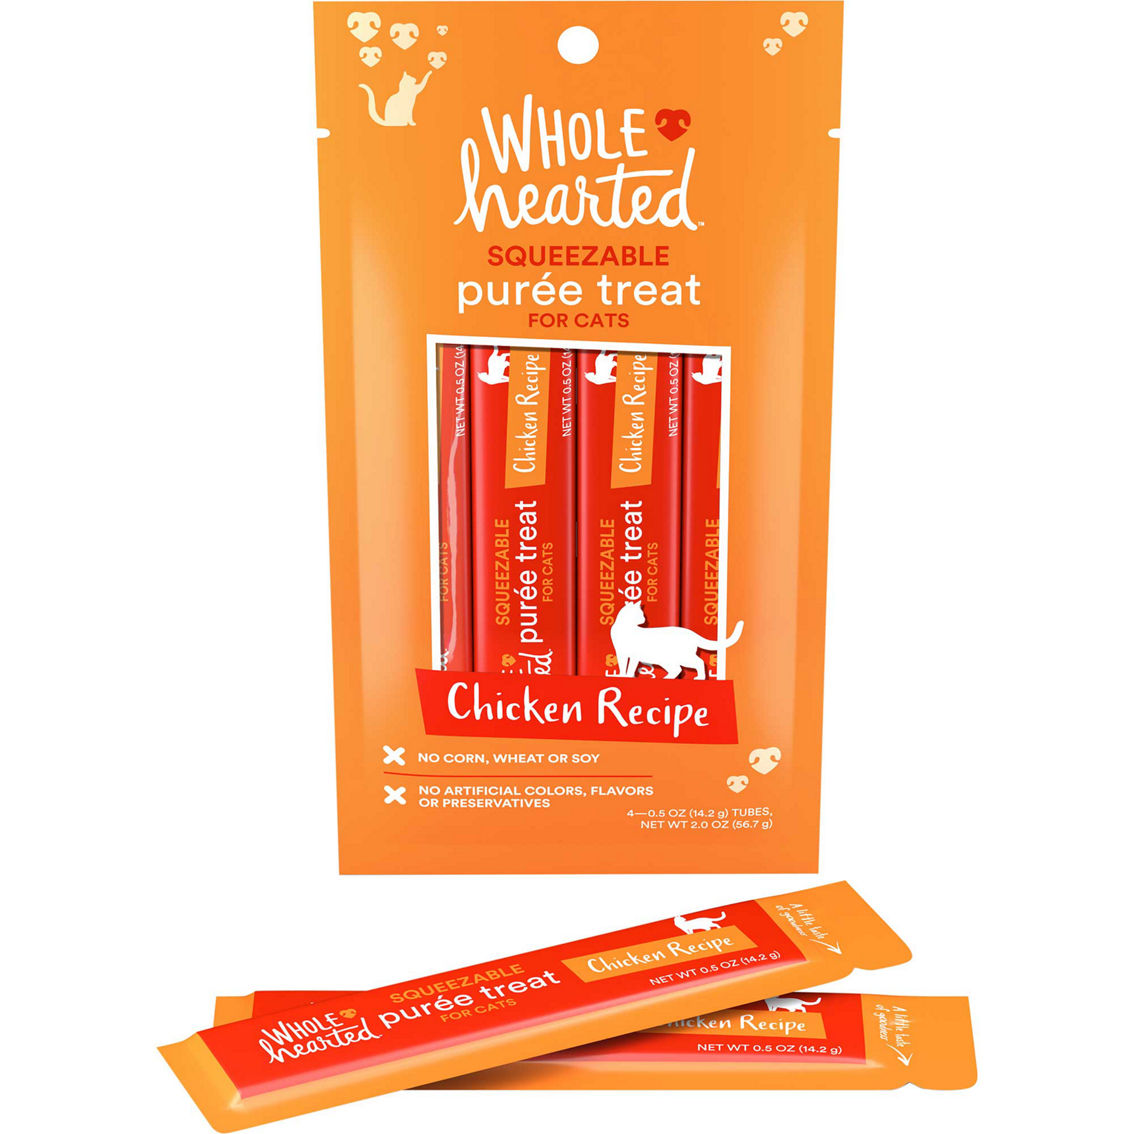 WholeHearted Chicken Recipe Puree Squeezable Cat Treats 4 ct., 0.5 oz. - Image 3 of 5